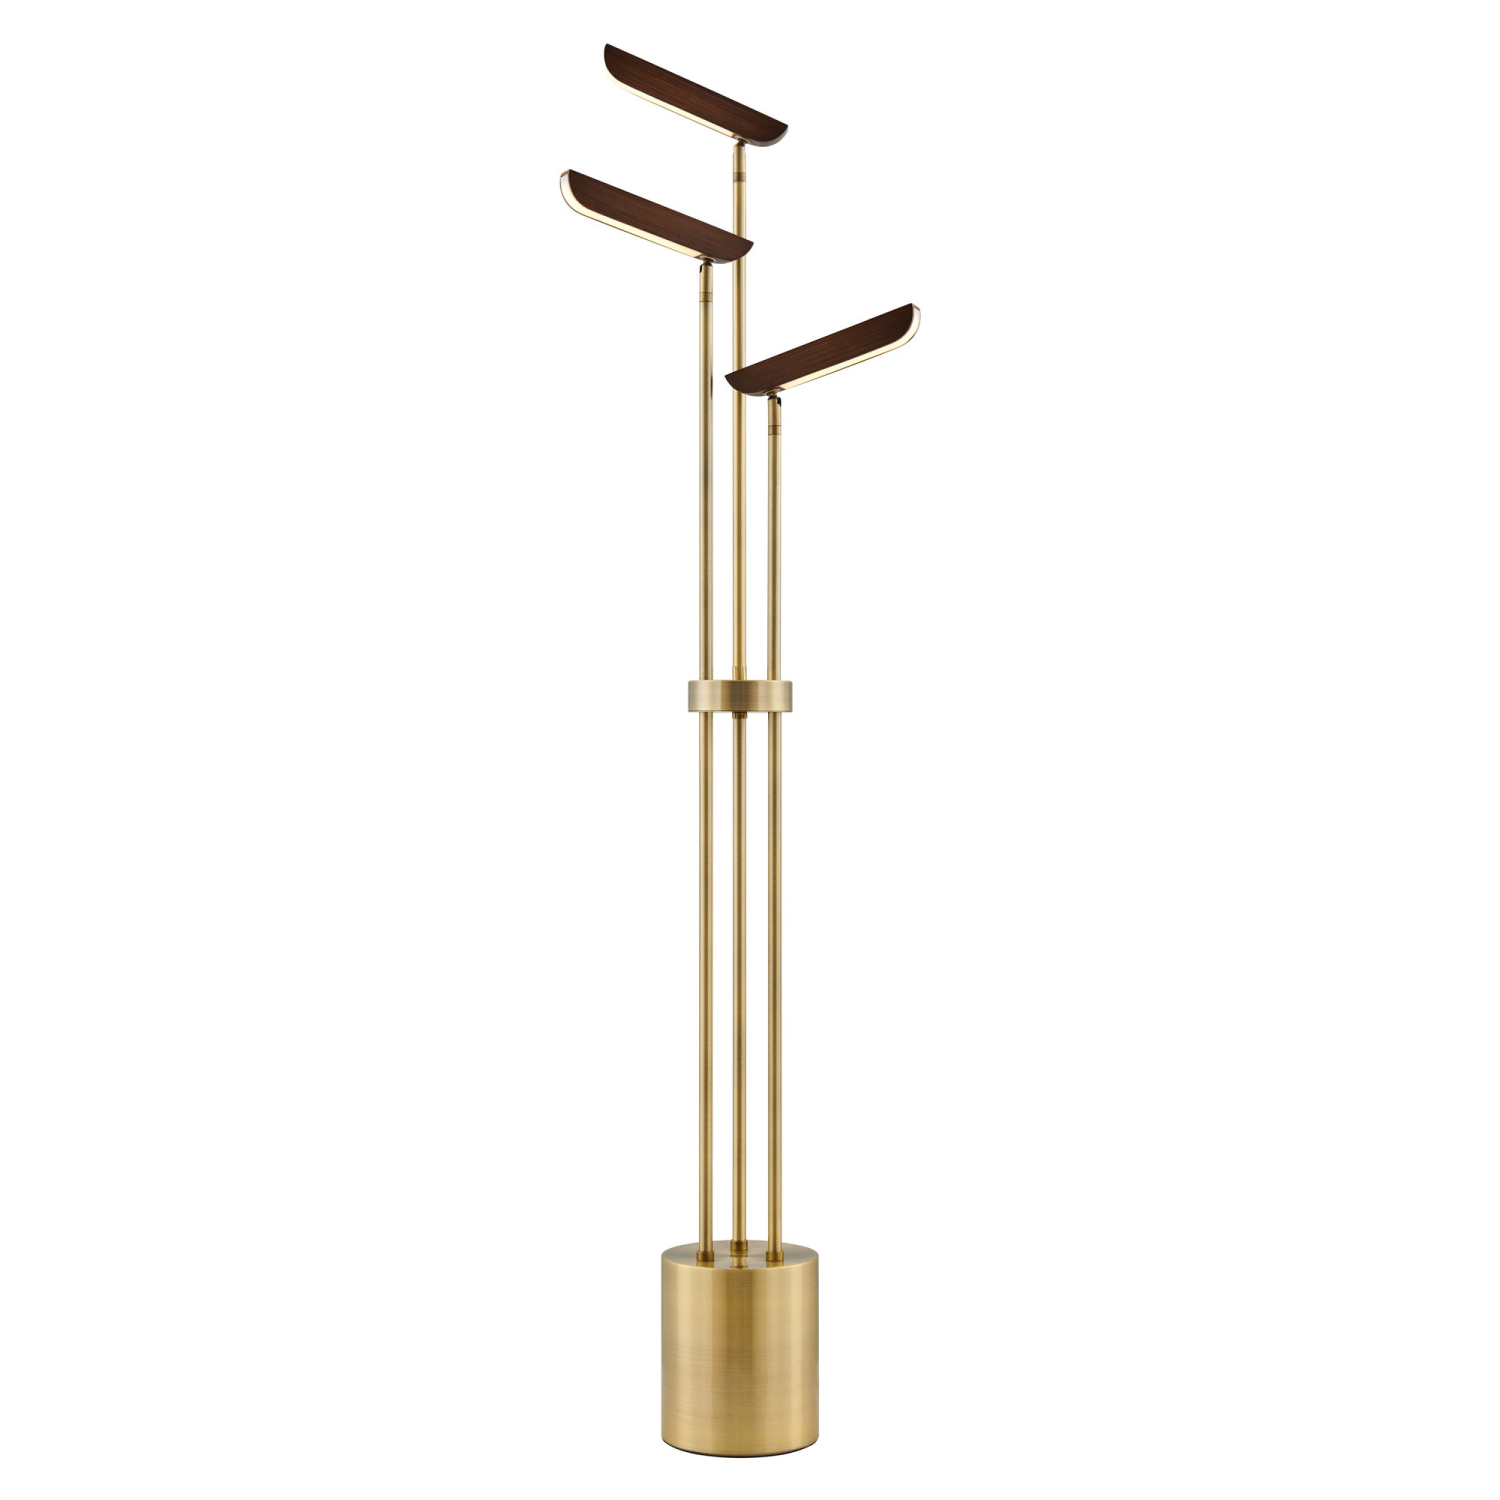 Jameson Floor Lamp Picture with White Background